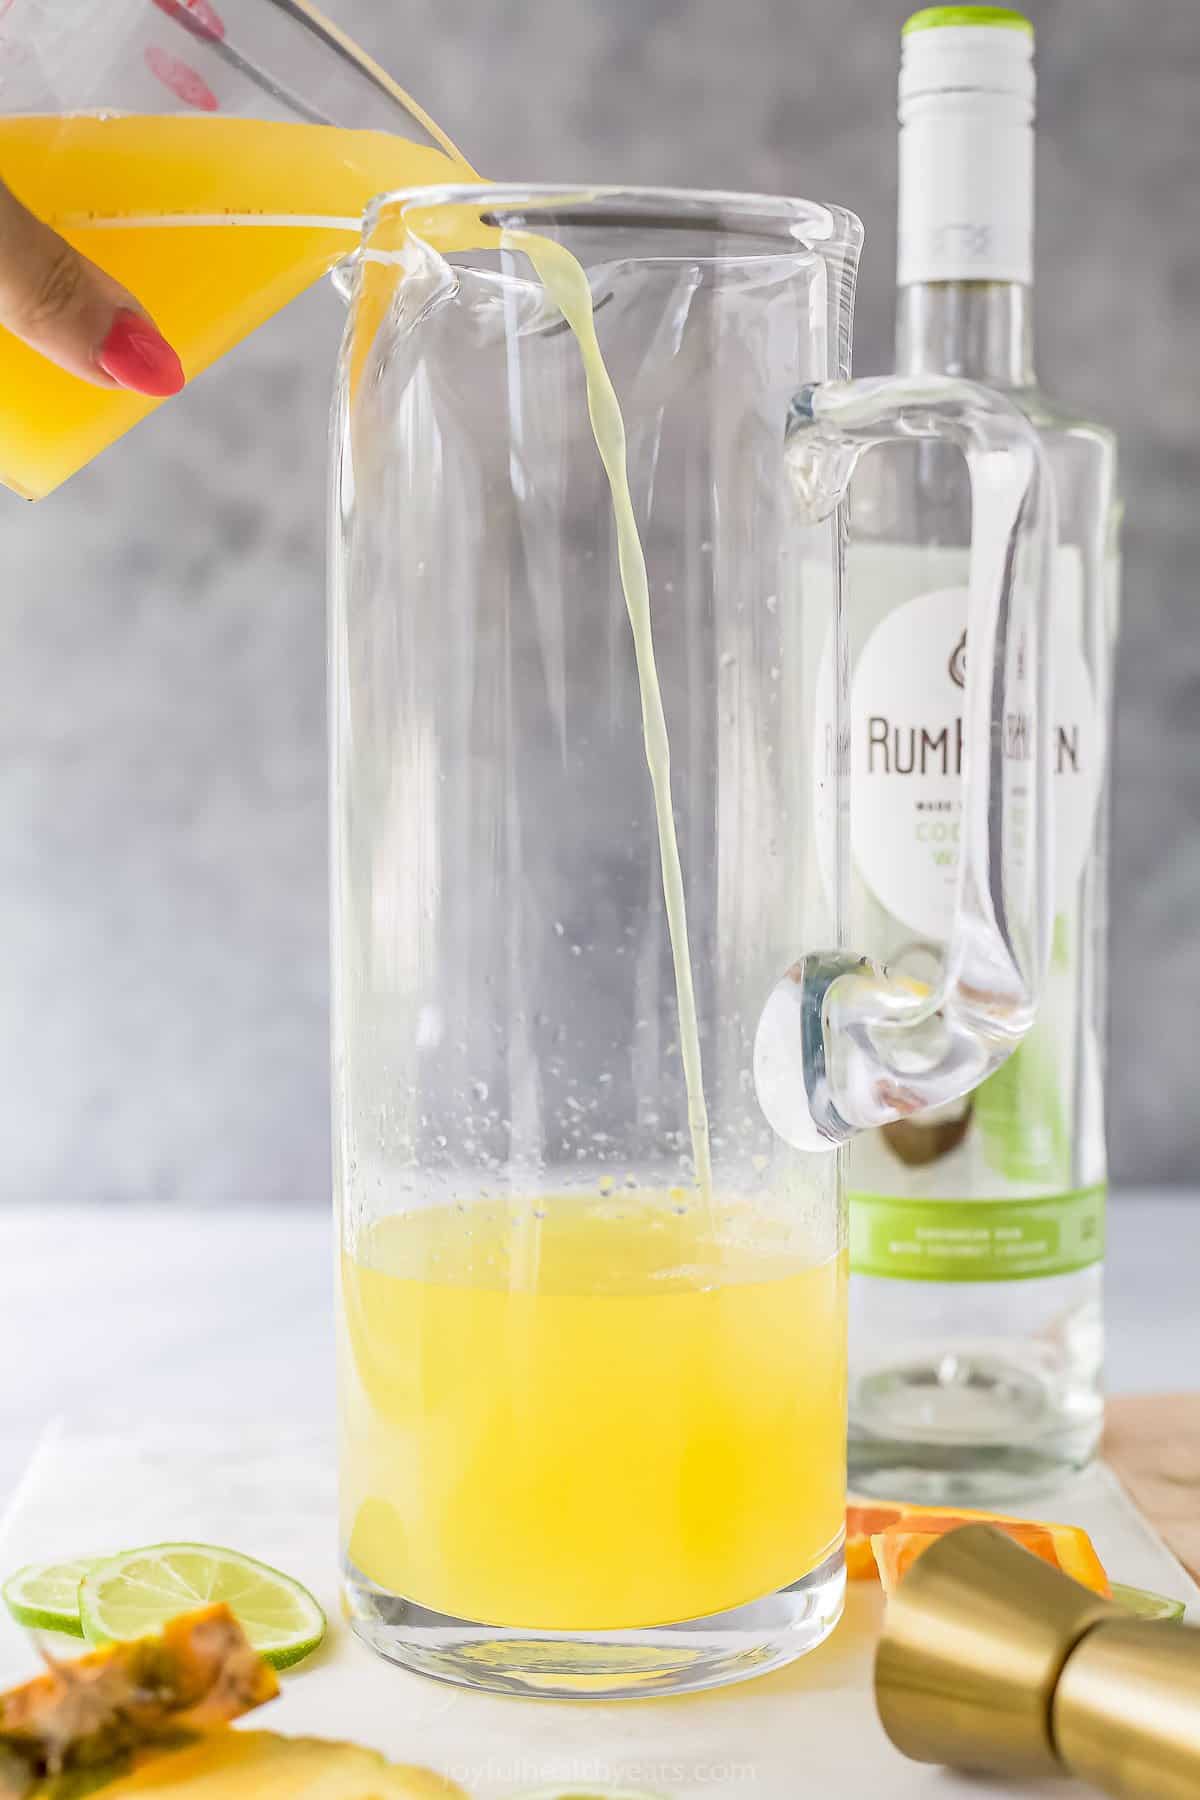 The pineapple juice mixture being poured into a tall pitcher